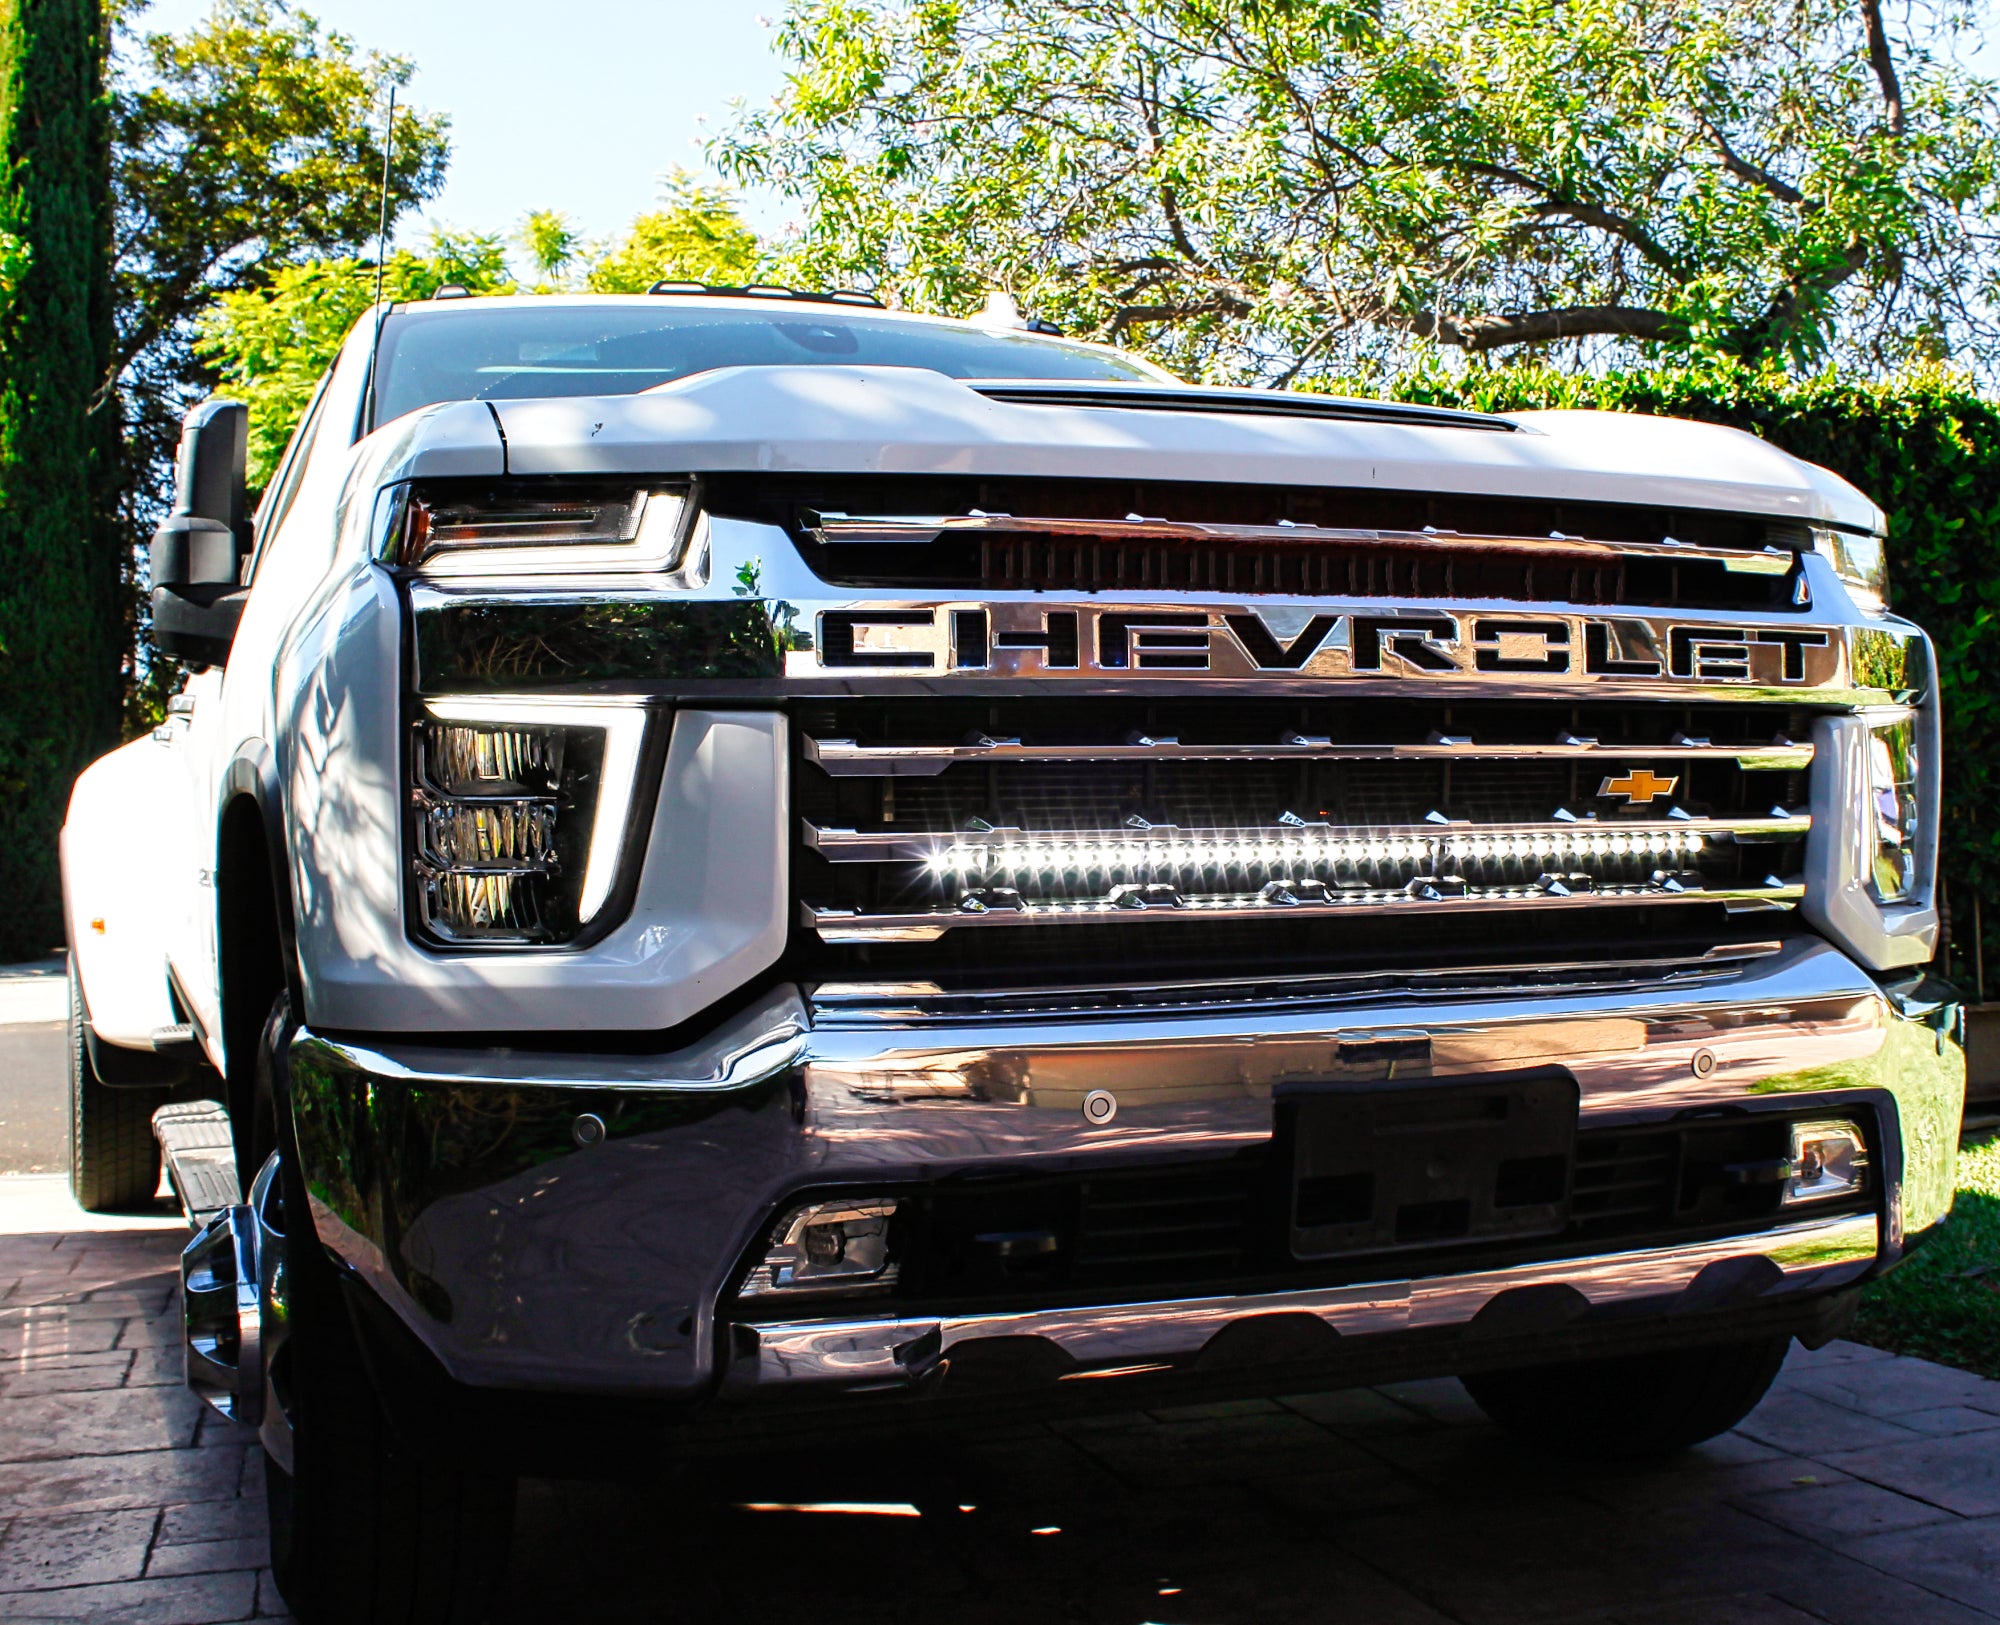 2020 2021 2022 2023 white Chevrolet Silverado 2500/3500HD one white 40in Light Bar behind the grille by M&R Automotive